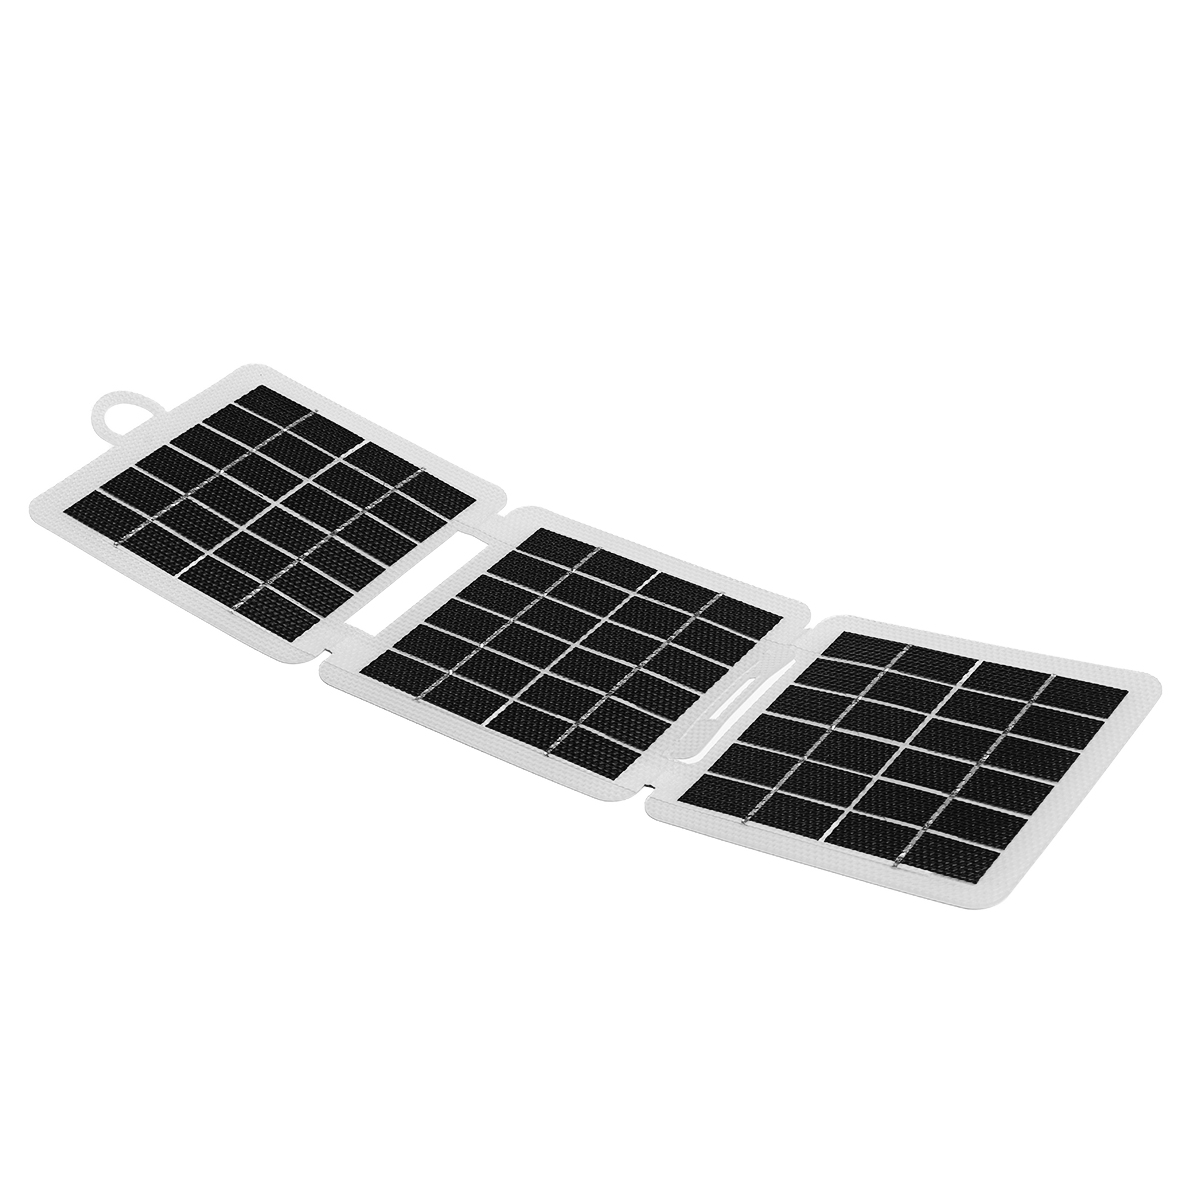 7W-Foldable-Solar-Panel-USB-Output-Port-Portable-Monocrystalline-Charging-Panel-Outdoor-Camping-Emer-1900305-8